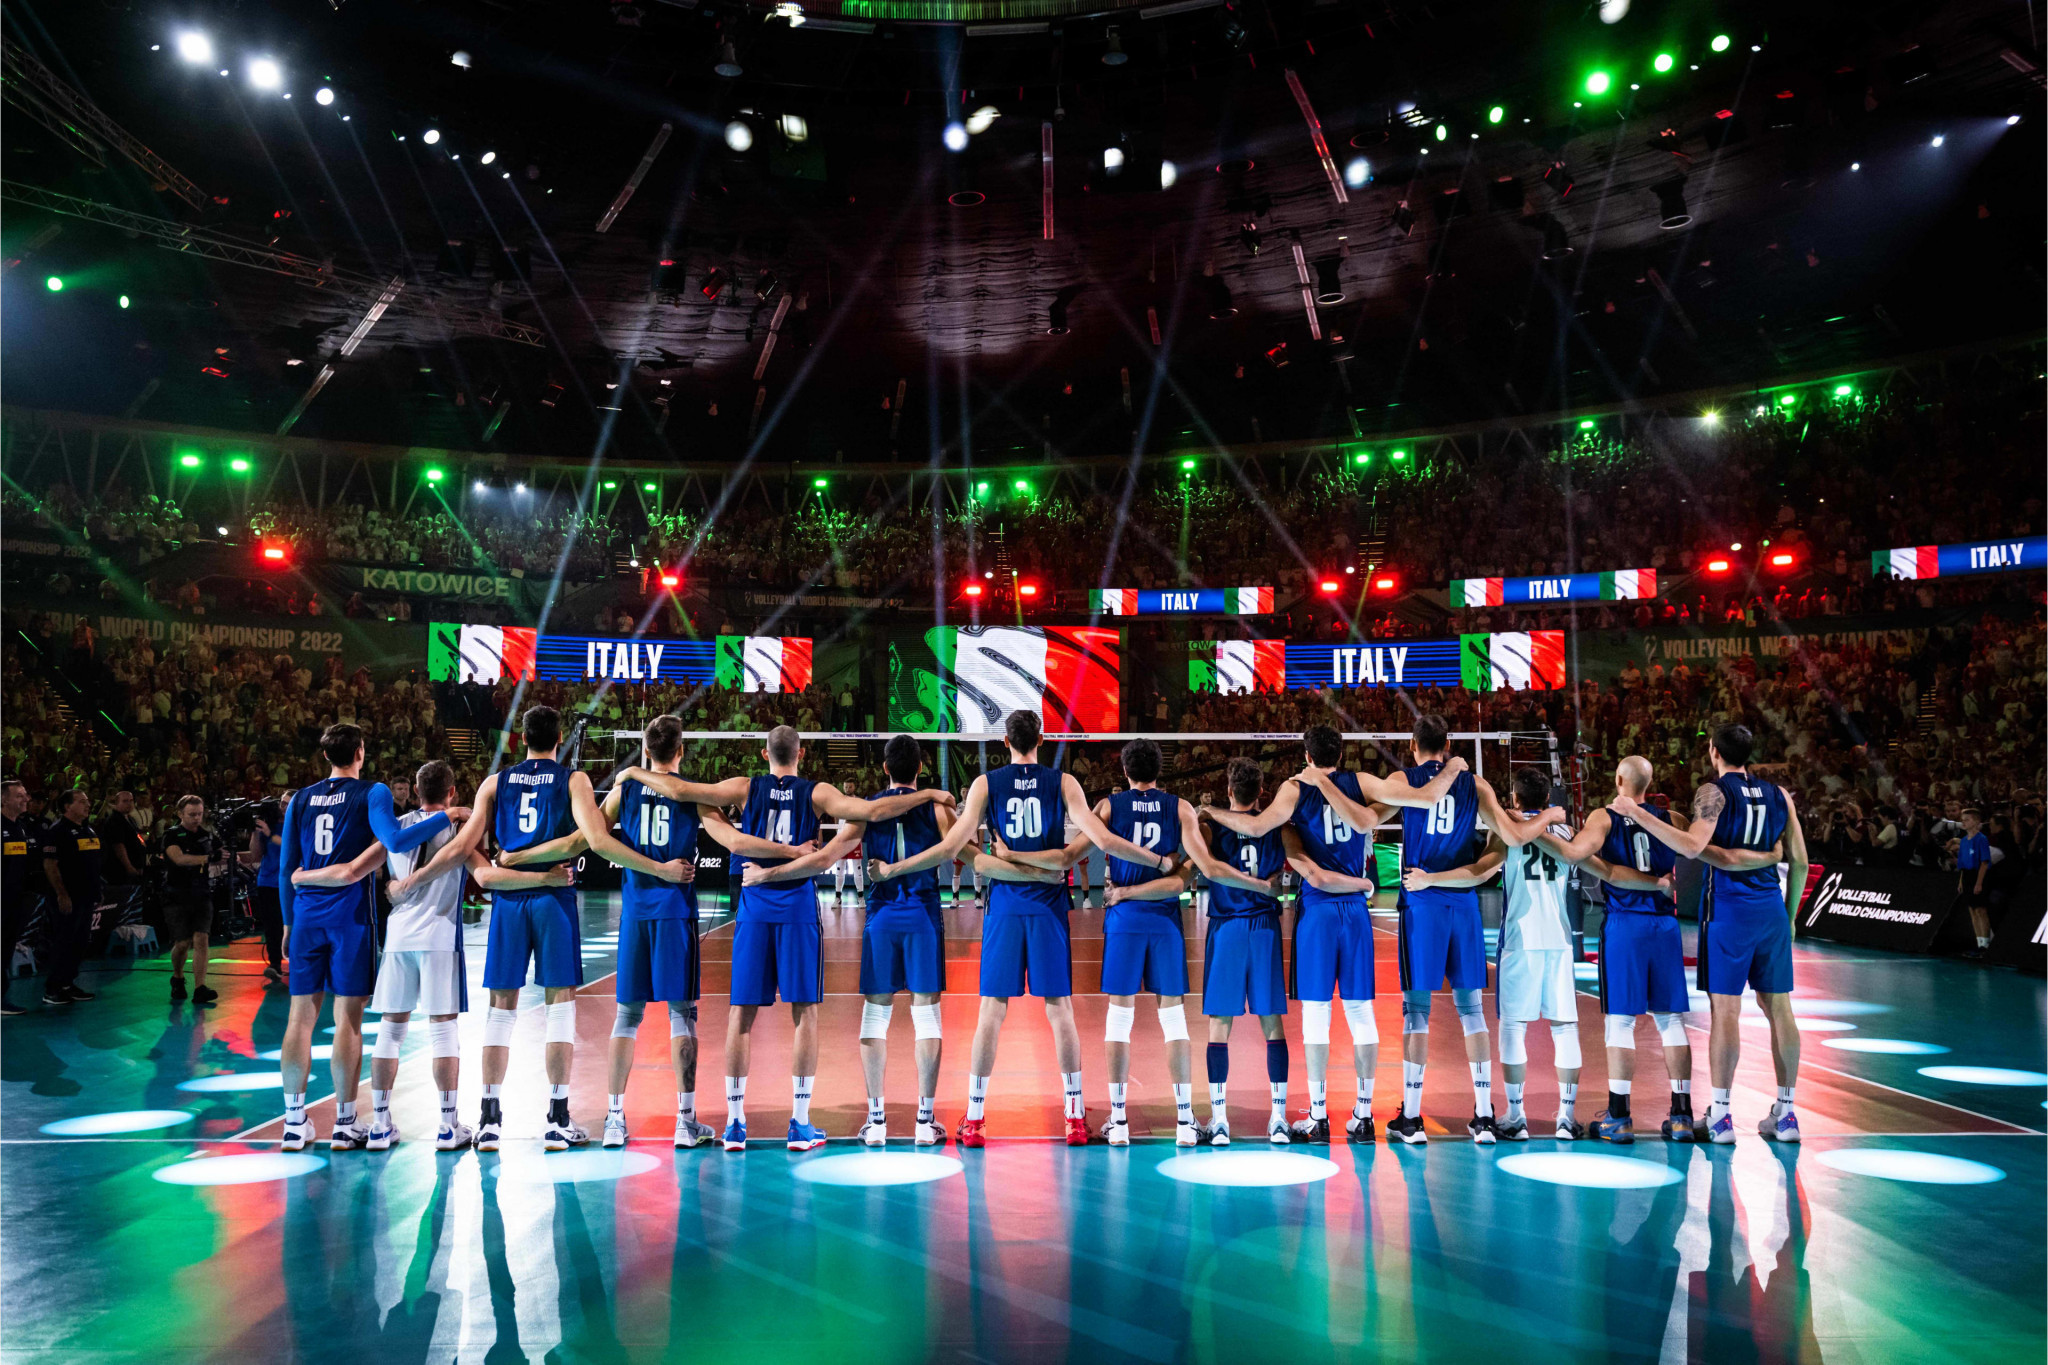 Italy won the Men's Volleyball World Championship held in Poland and Slovenia ©Volleyball World
